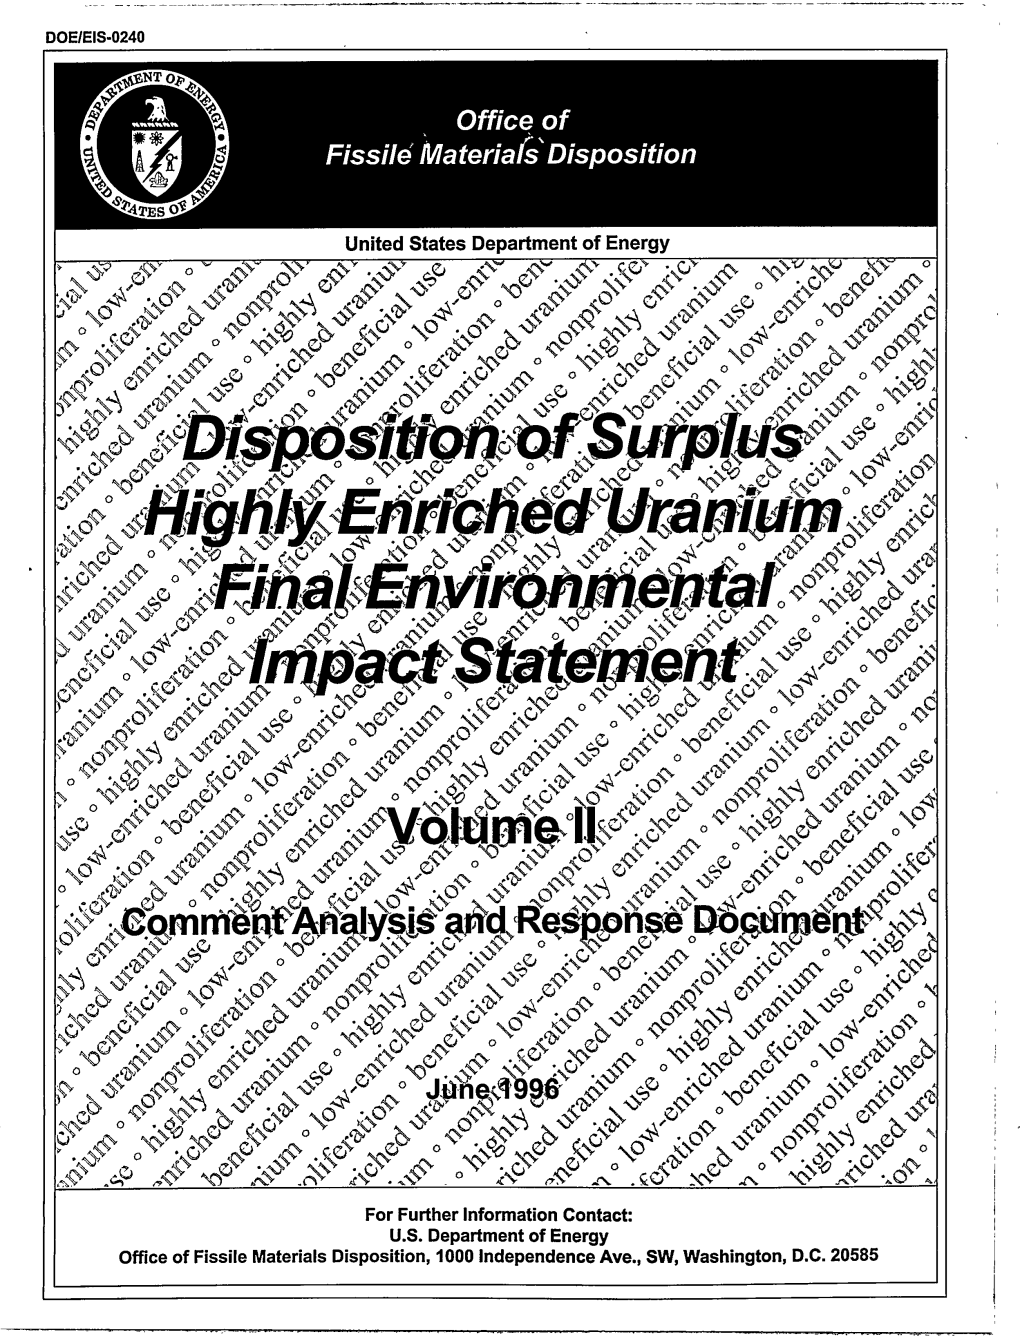 Disposition of Surplus Highly Enriched Uranium Final Environmental Impact Statement